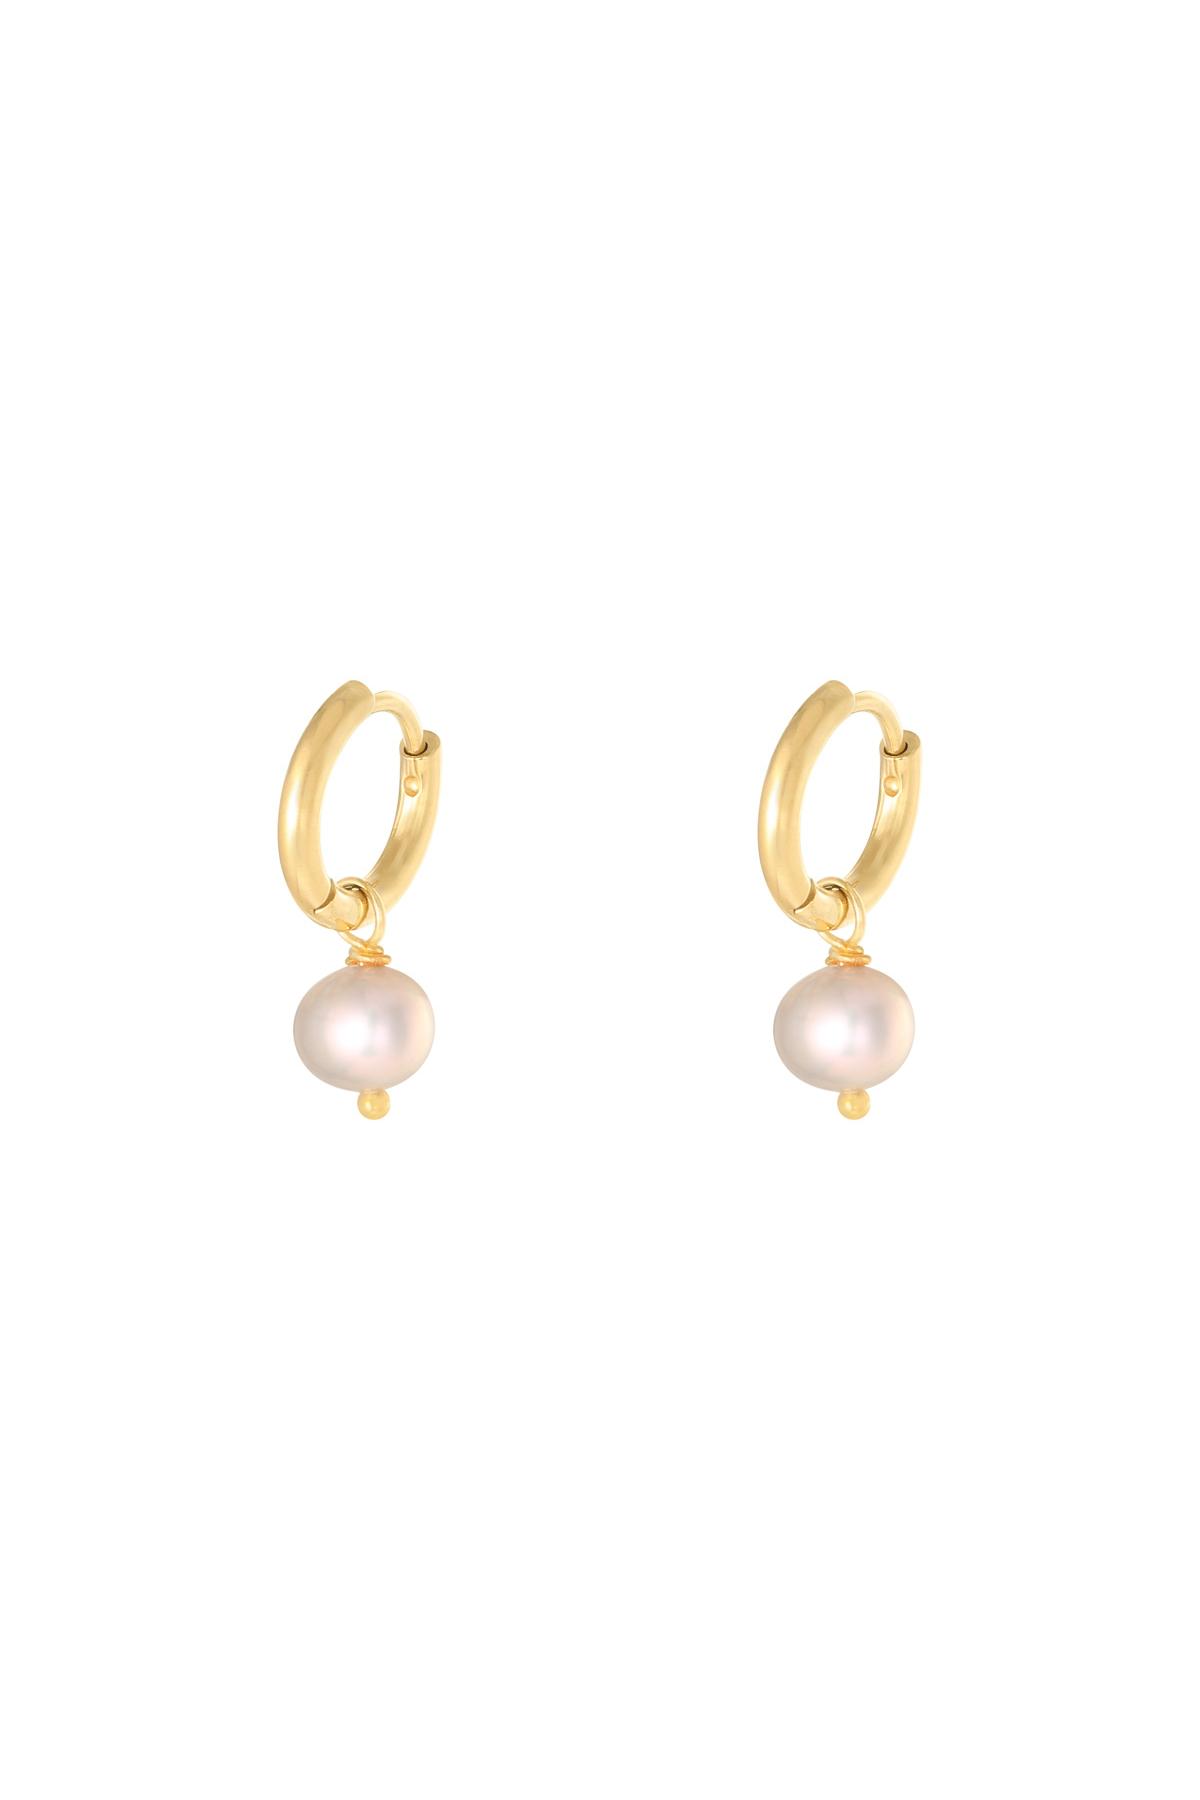 Rose / Boucles d'oreilles Pearl Of The Sea Rose Acier inoxydable Image3